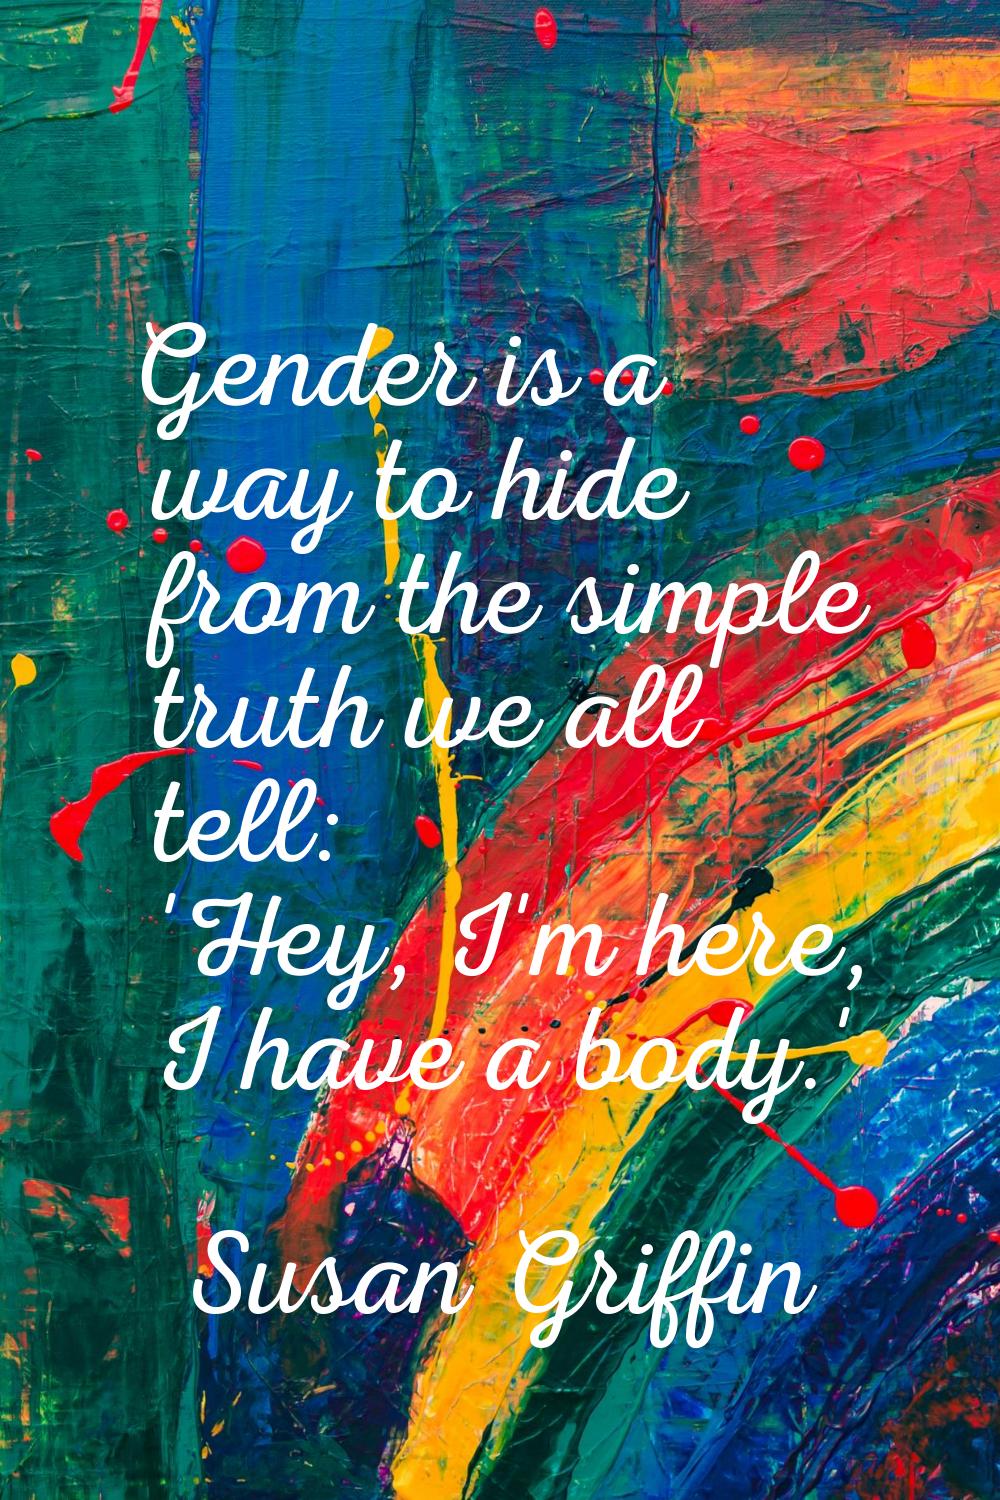 Gender is a way to hide from the simple truth we all tell: 'Hey, I'm here, I have a body.'